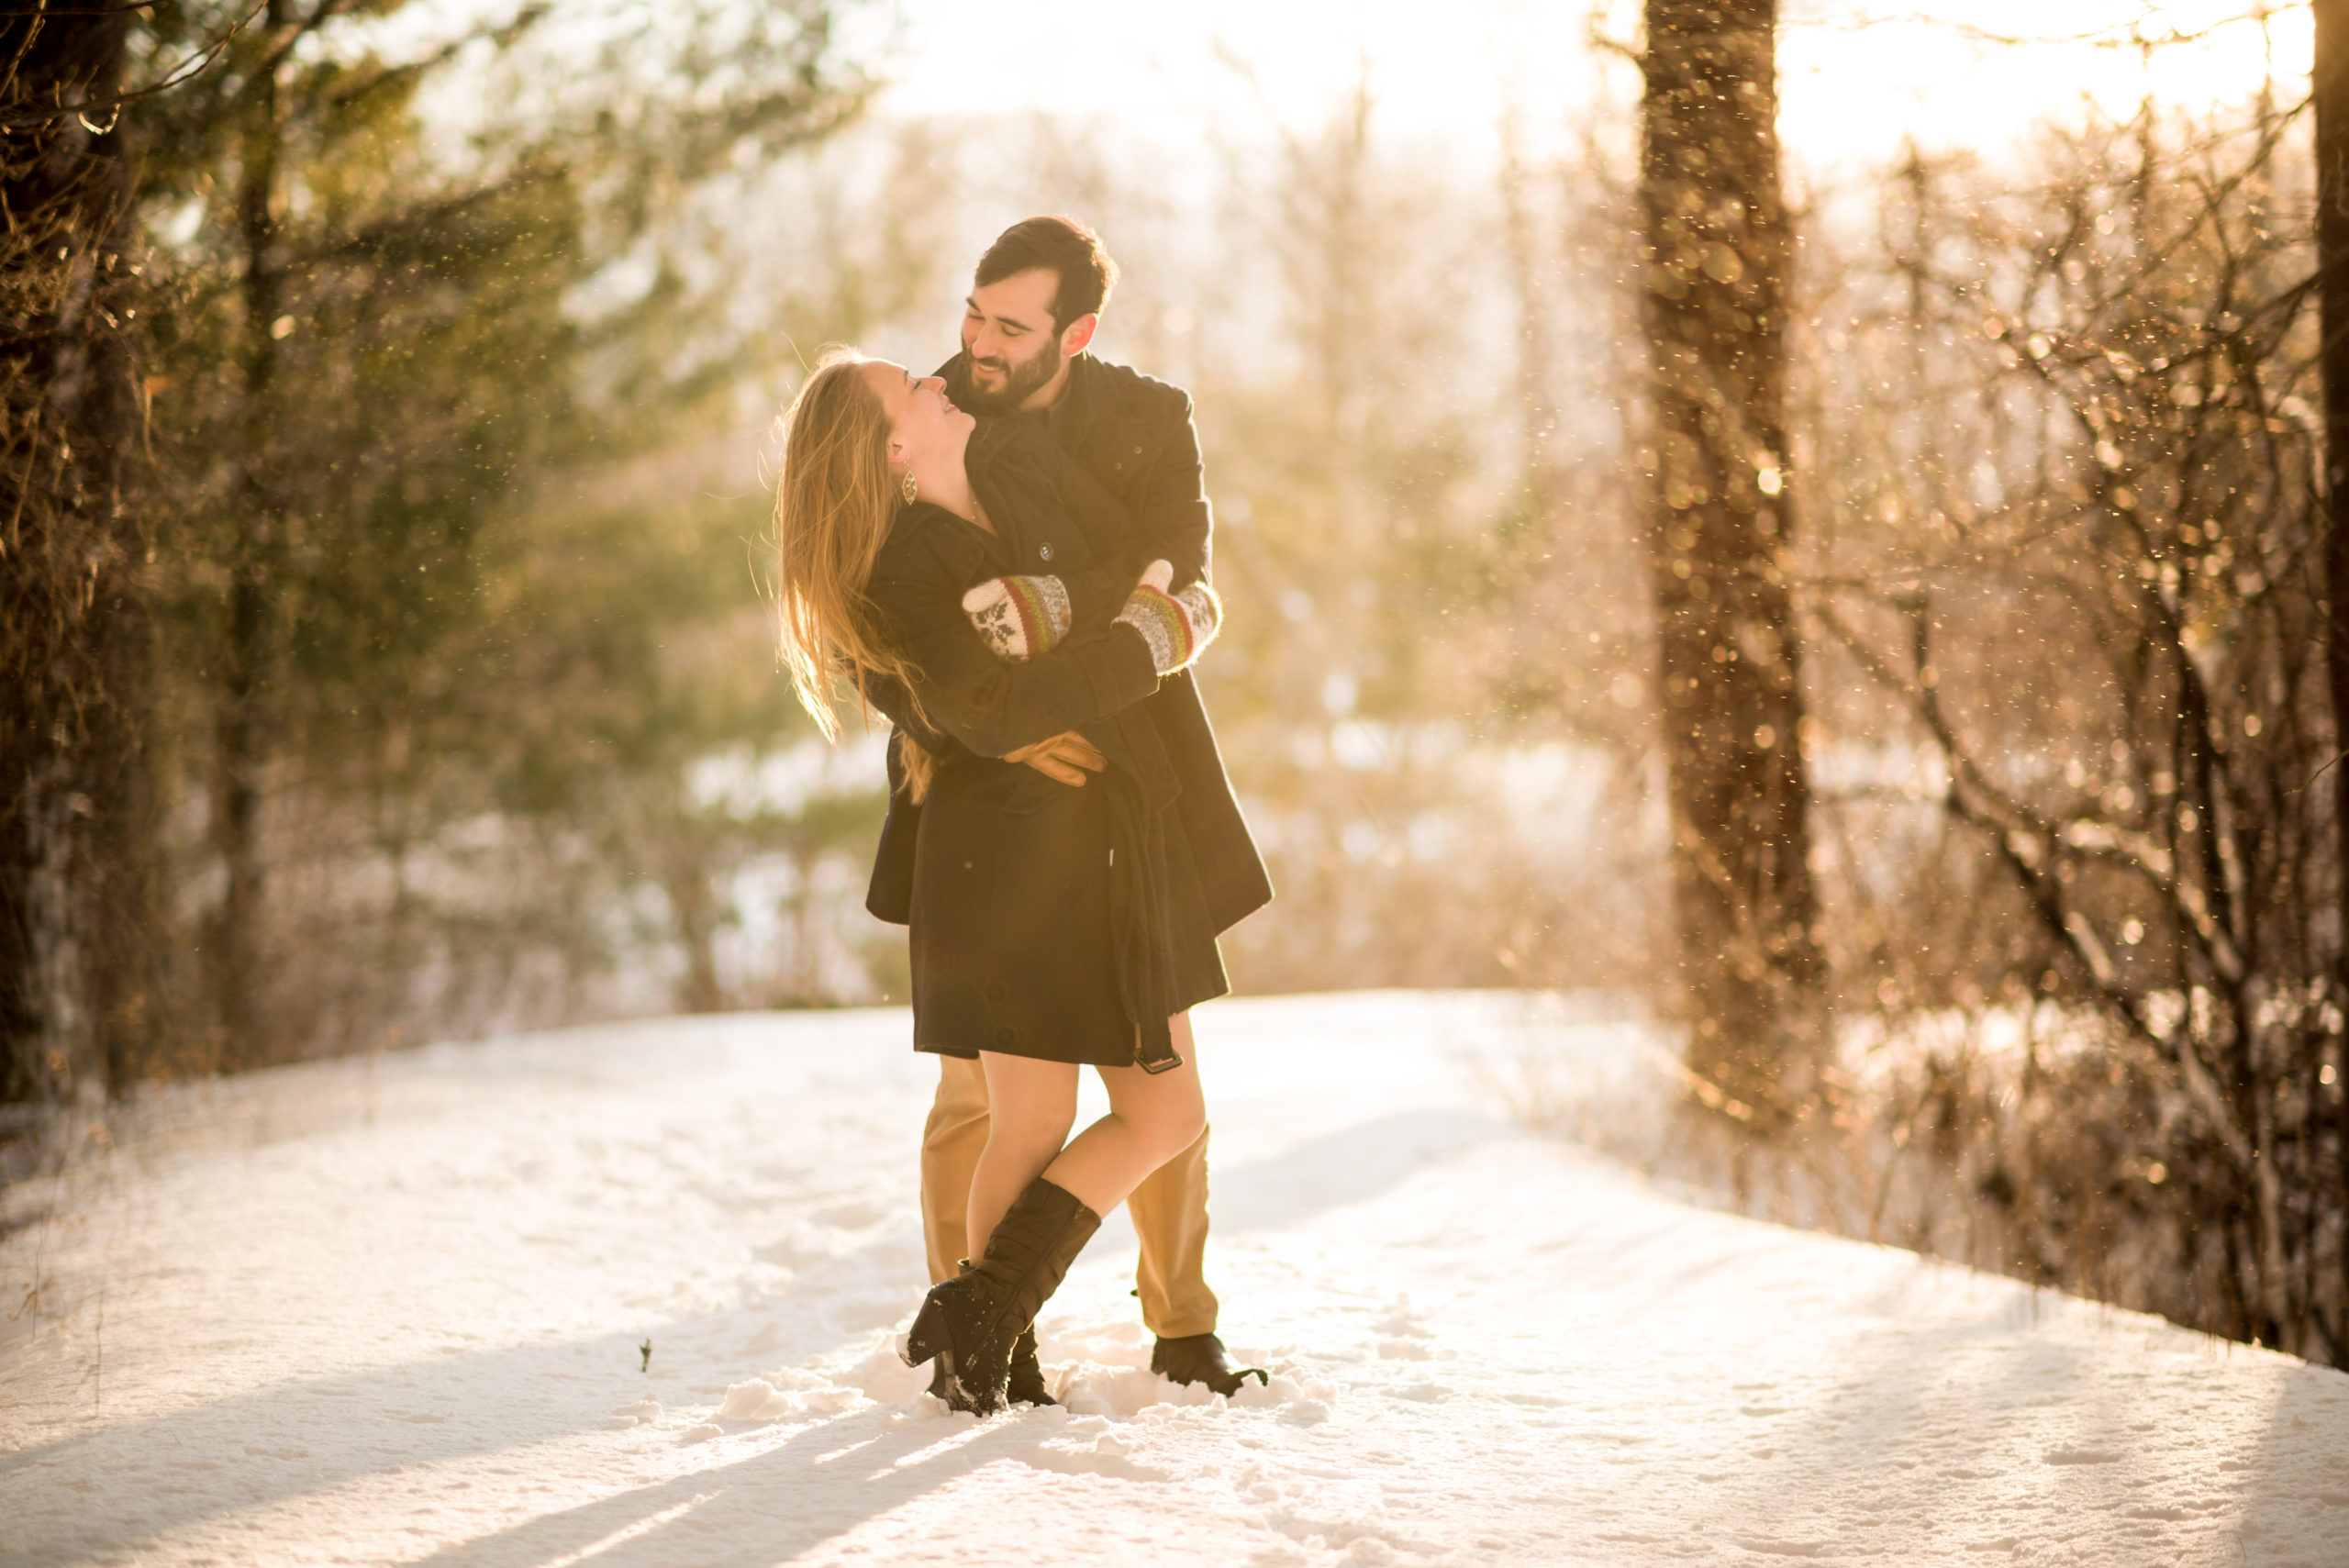 How to prepare for a winter photo session - Bella Wang Photography Blog